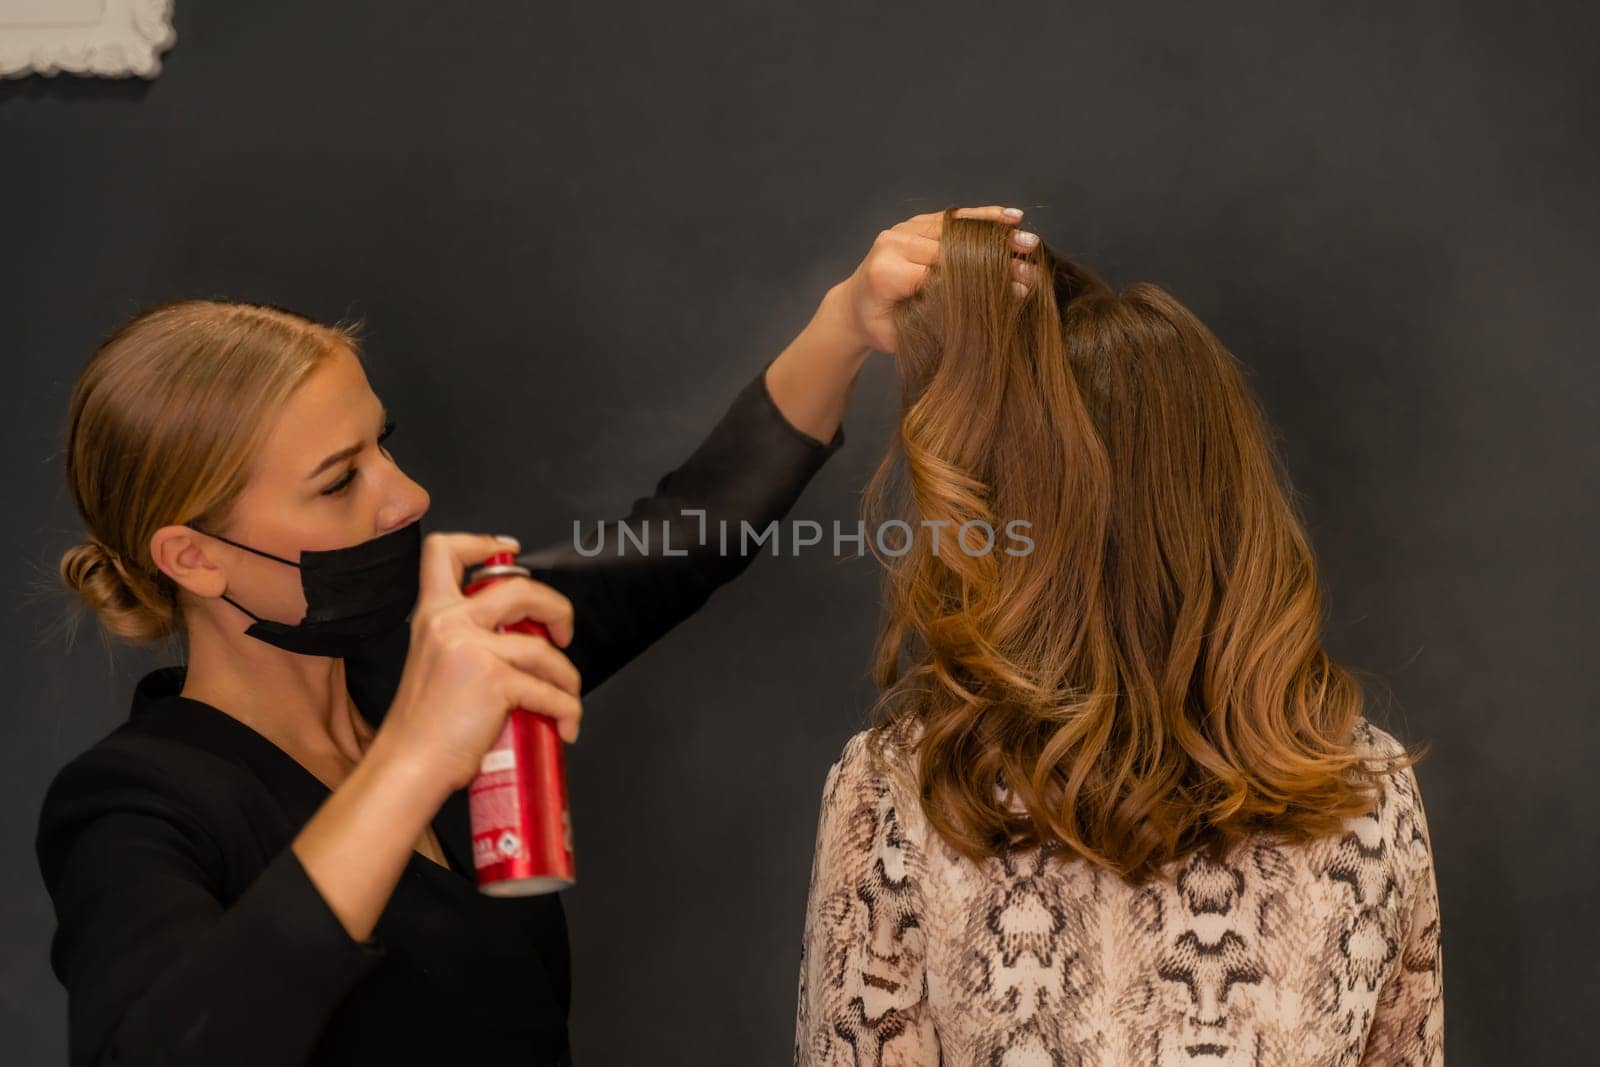 Women salon hairstyle. Hairdresser uses hairspray on client's hair in salon, Portrait of two beautiful women.